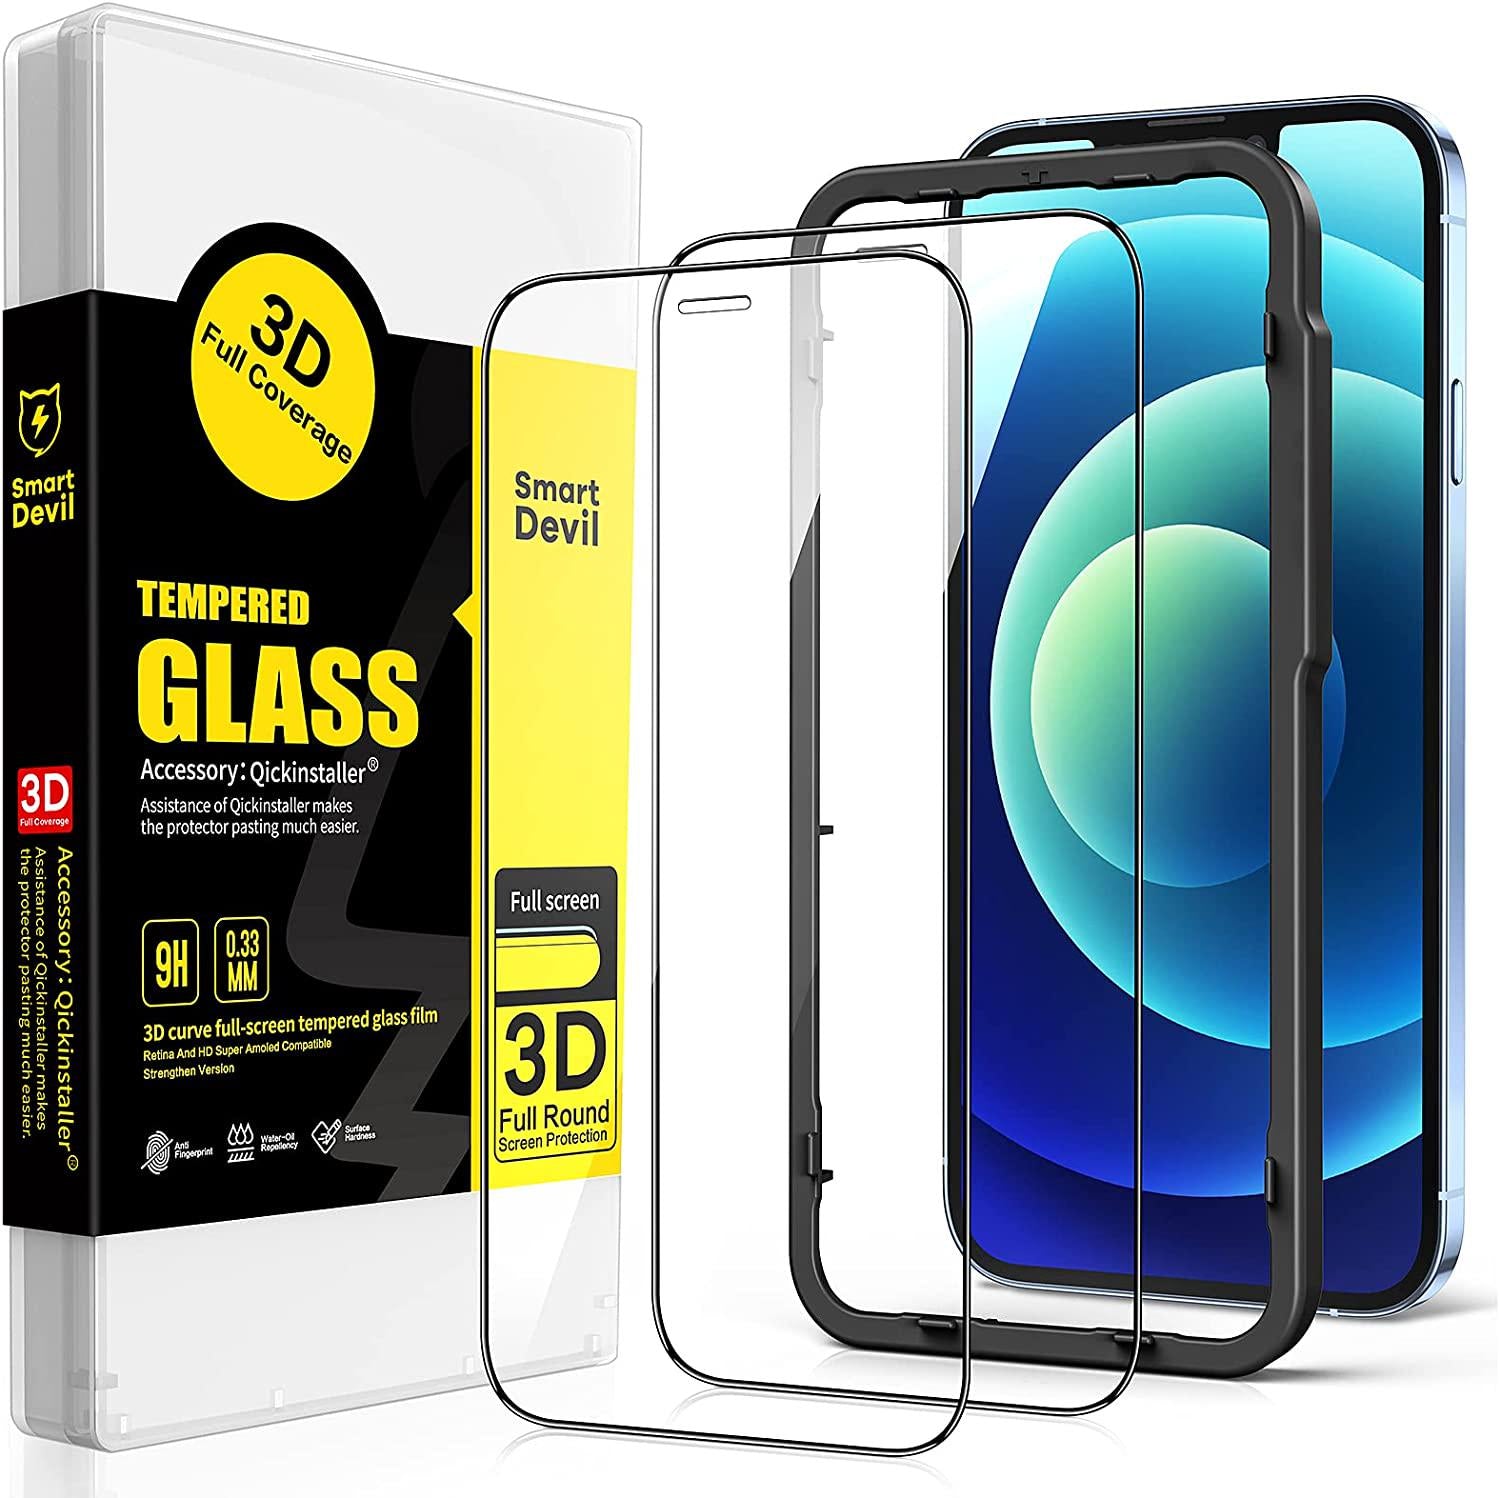 SmartDevil, Full Coverage SmartDevil Screen Protector for iPhone 12 and iPhone 12 Pro Case Friendly Tempered Glass Film with Installation Frame, High Definition,9H Hardness Shockproof, Anti-Scratch -2 Pack